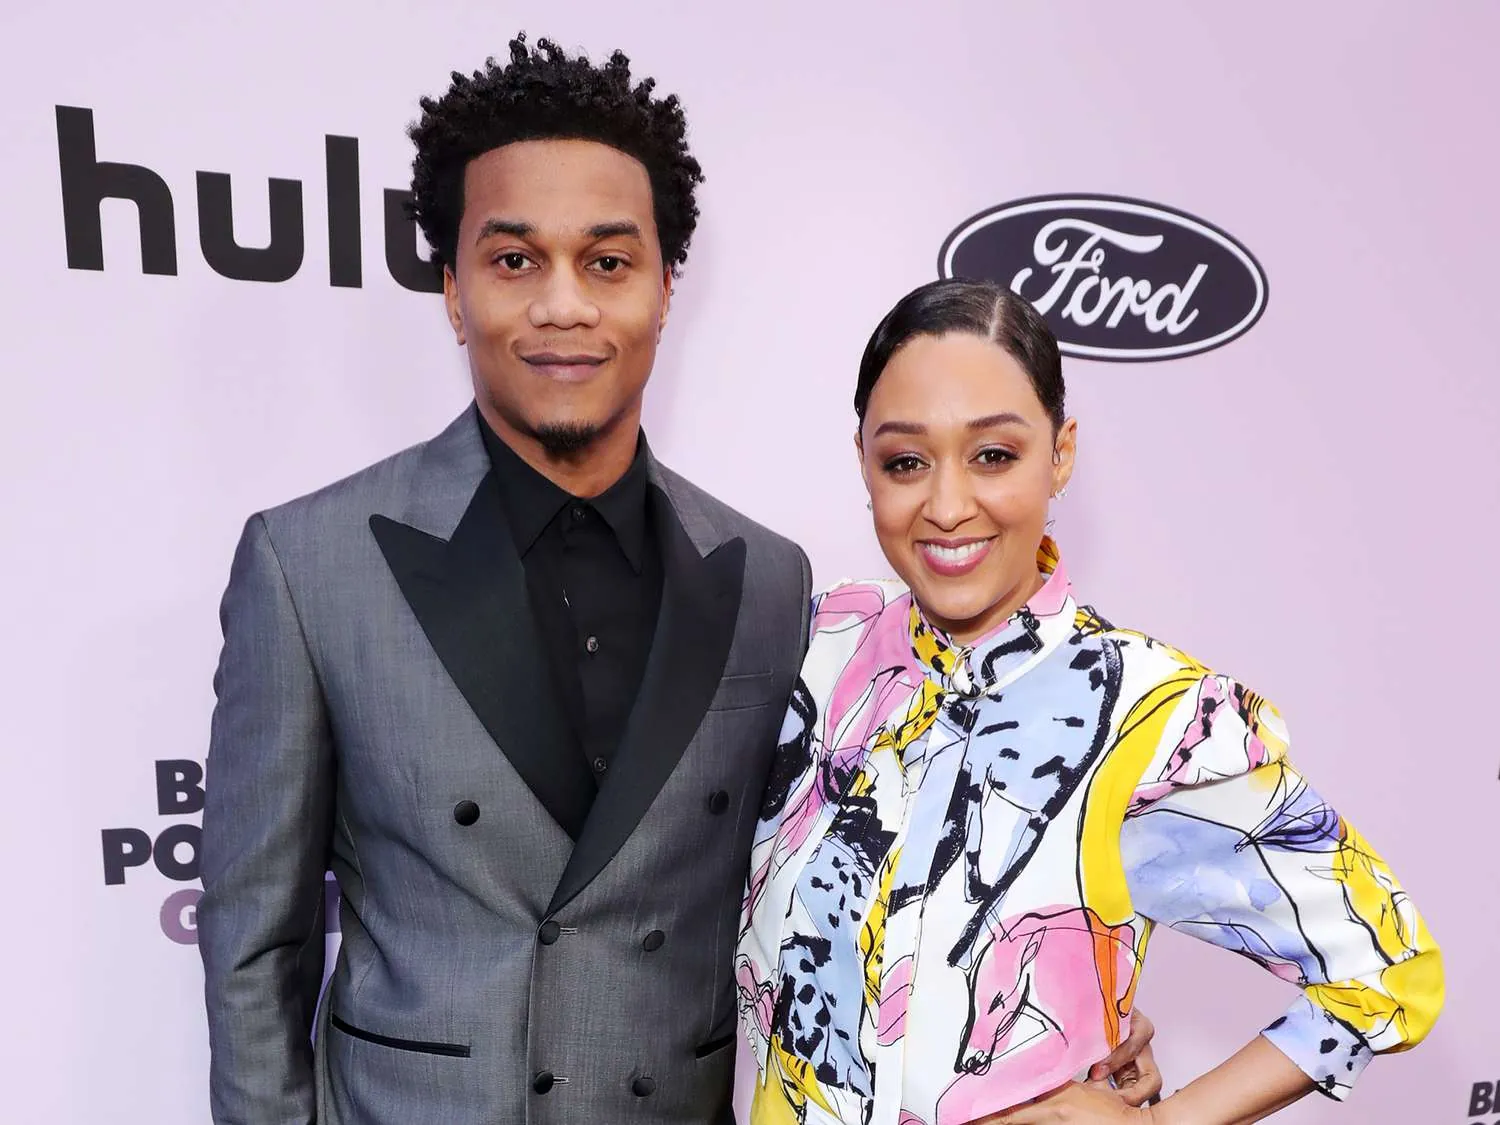 Who Is Tia Mowry Dating?